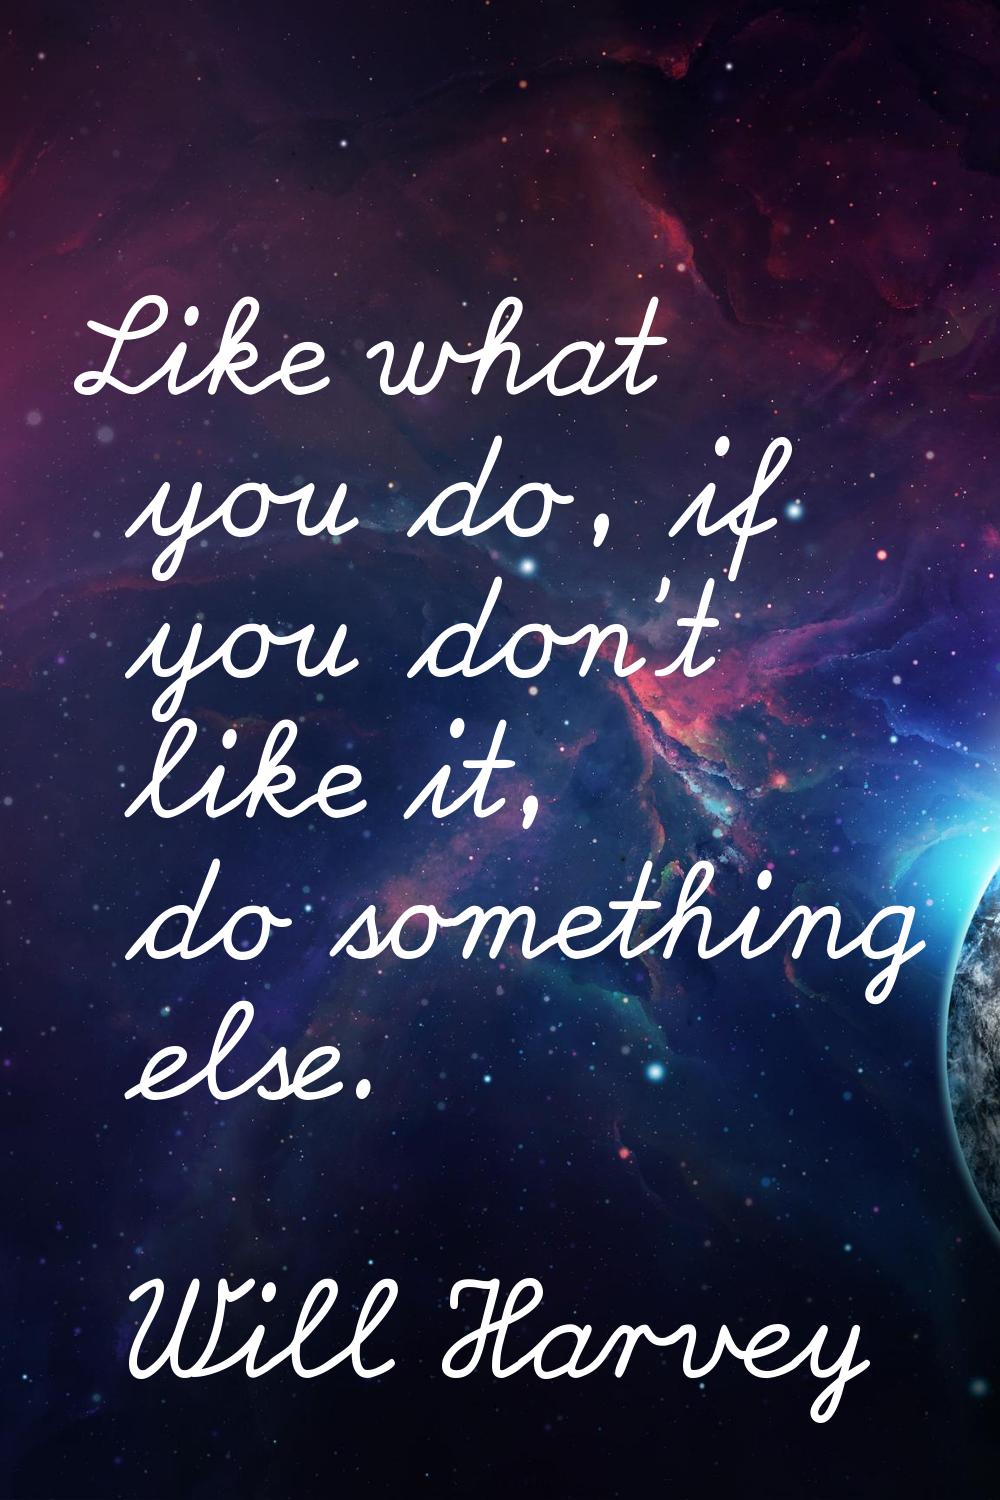 Like what you do, if you don't like it, do something else.